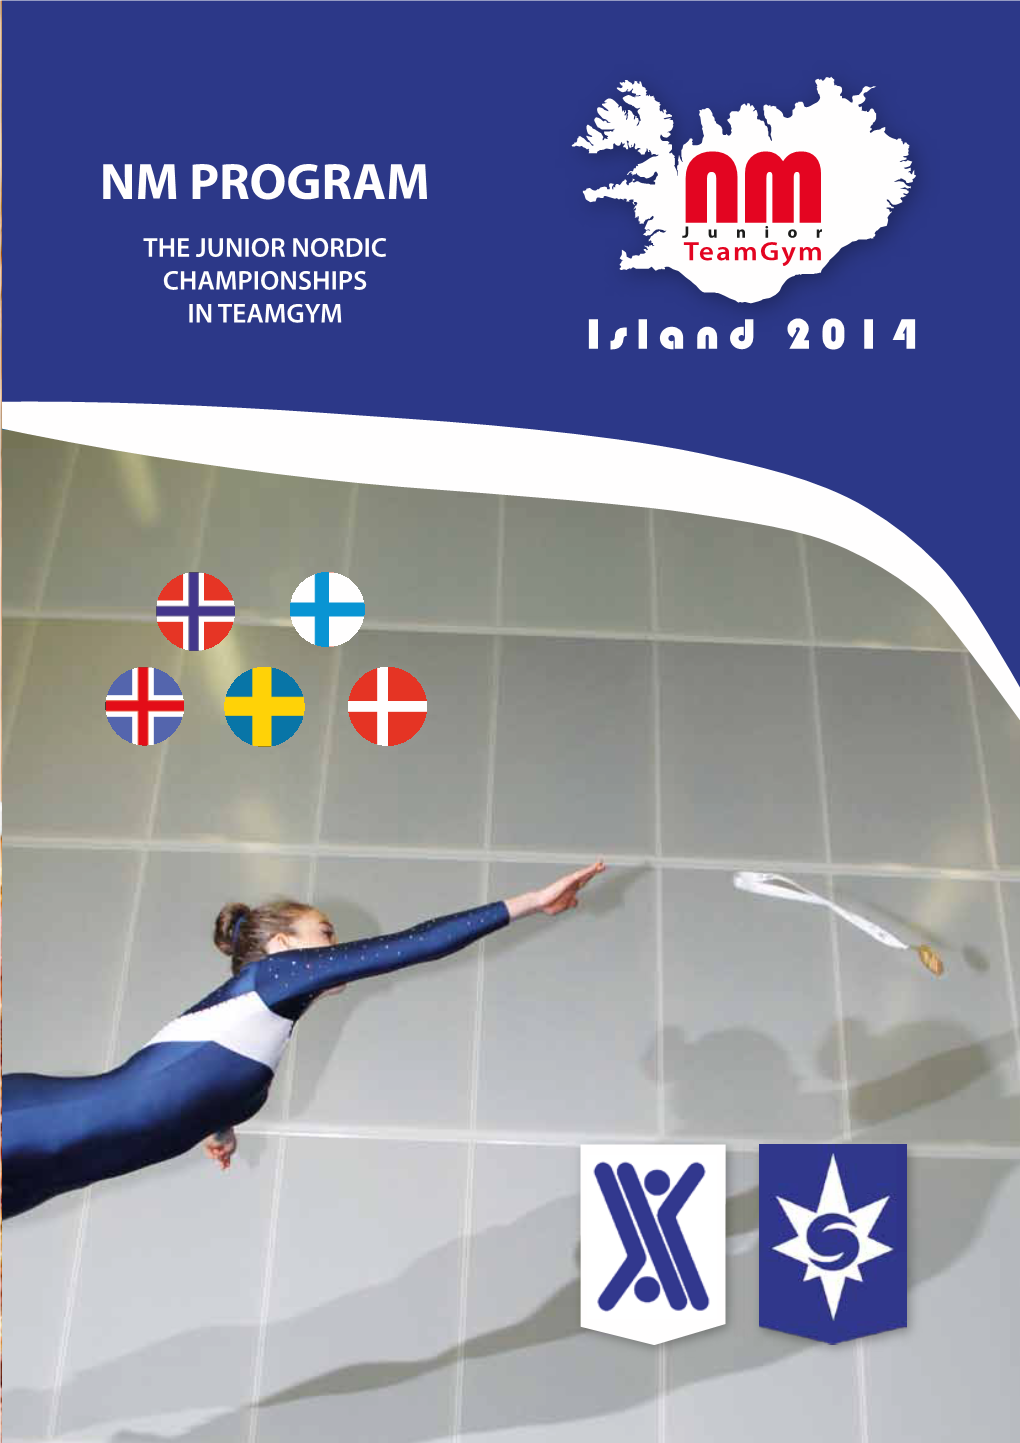 NM PROGRAM the JUNIOR NORDIC CHAMPIONSHIPS in TEAMGYM I S L and 2014